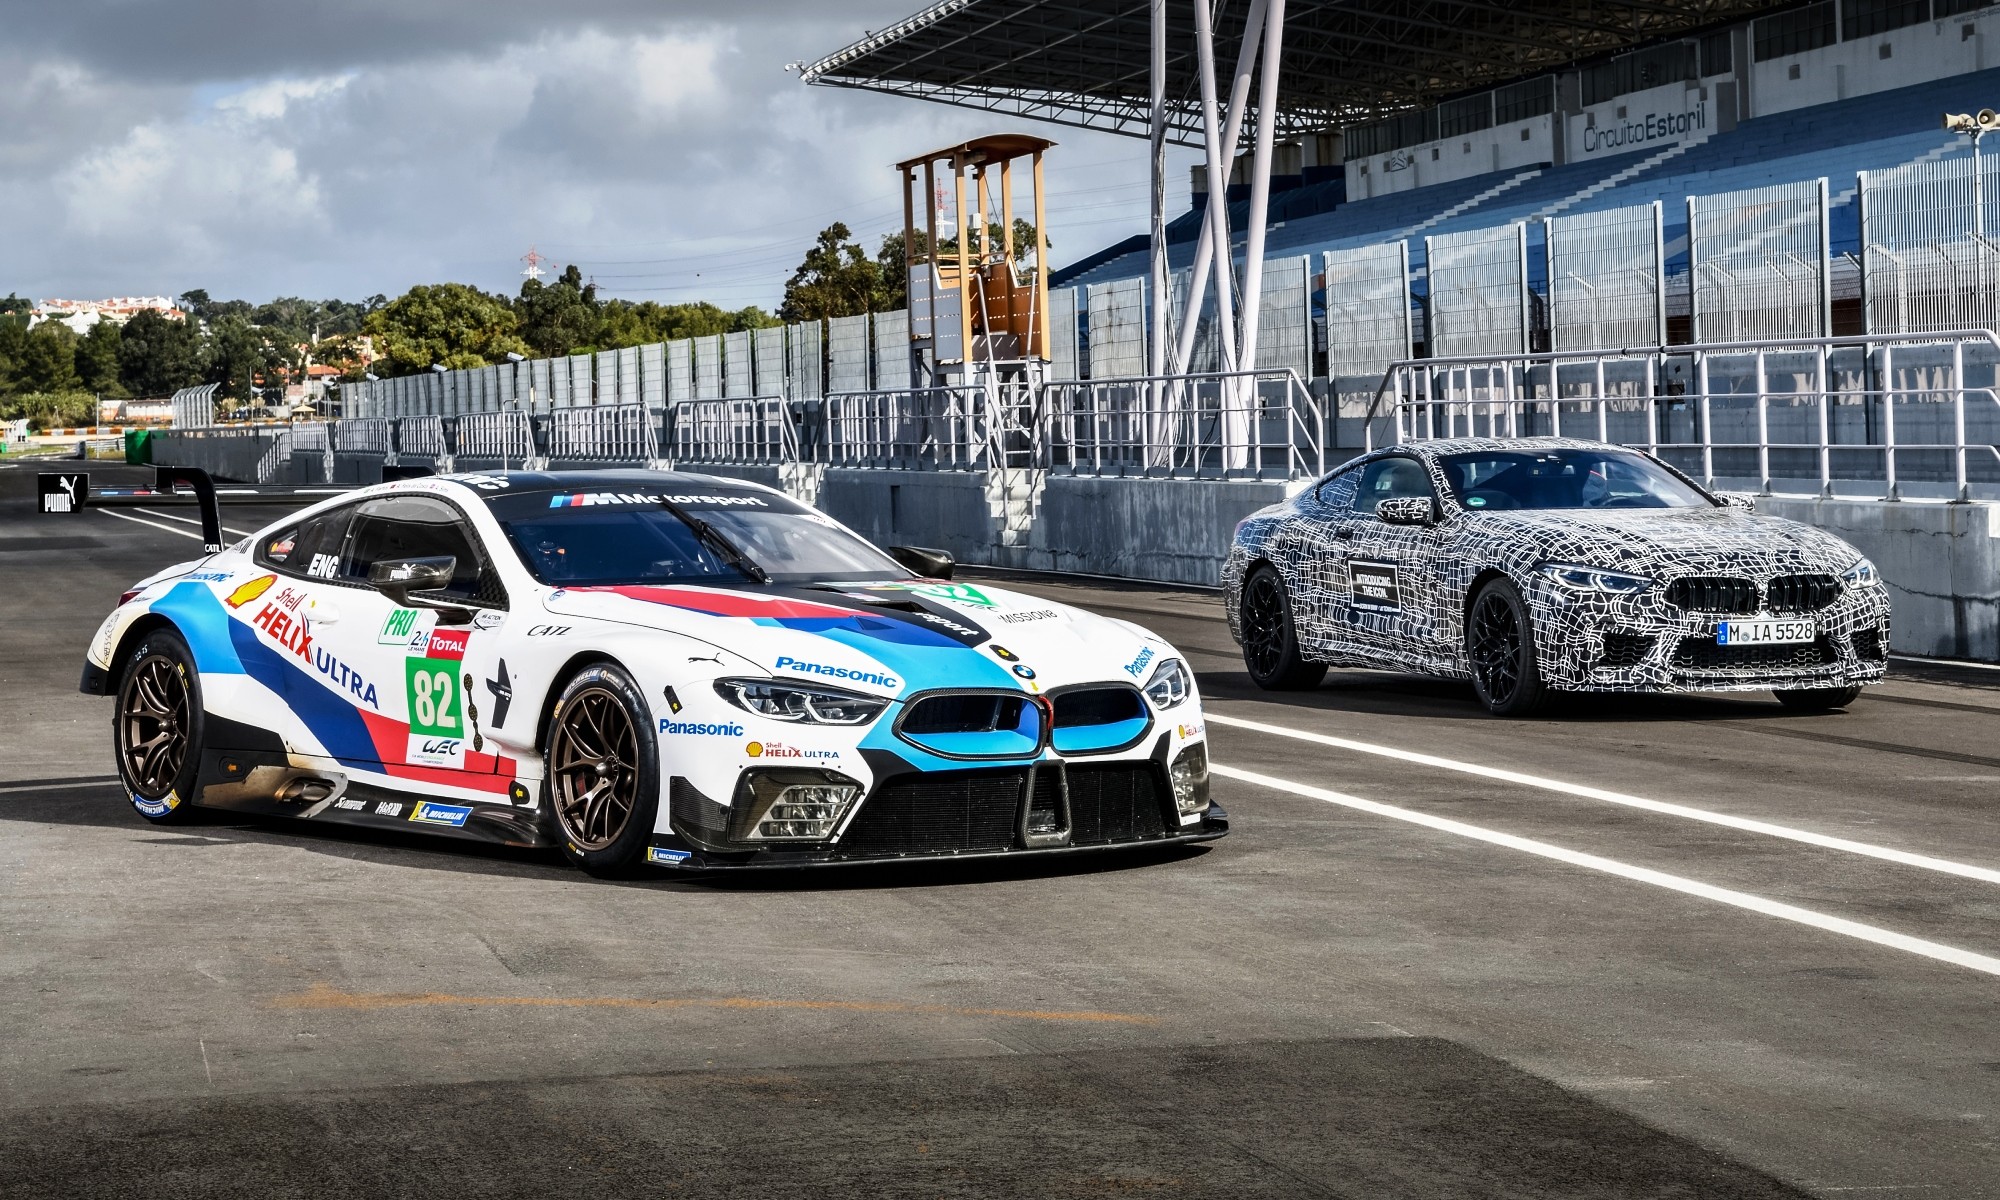 BMW M8 with its racecar counterpart